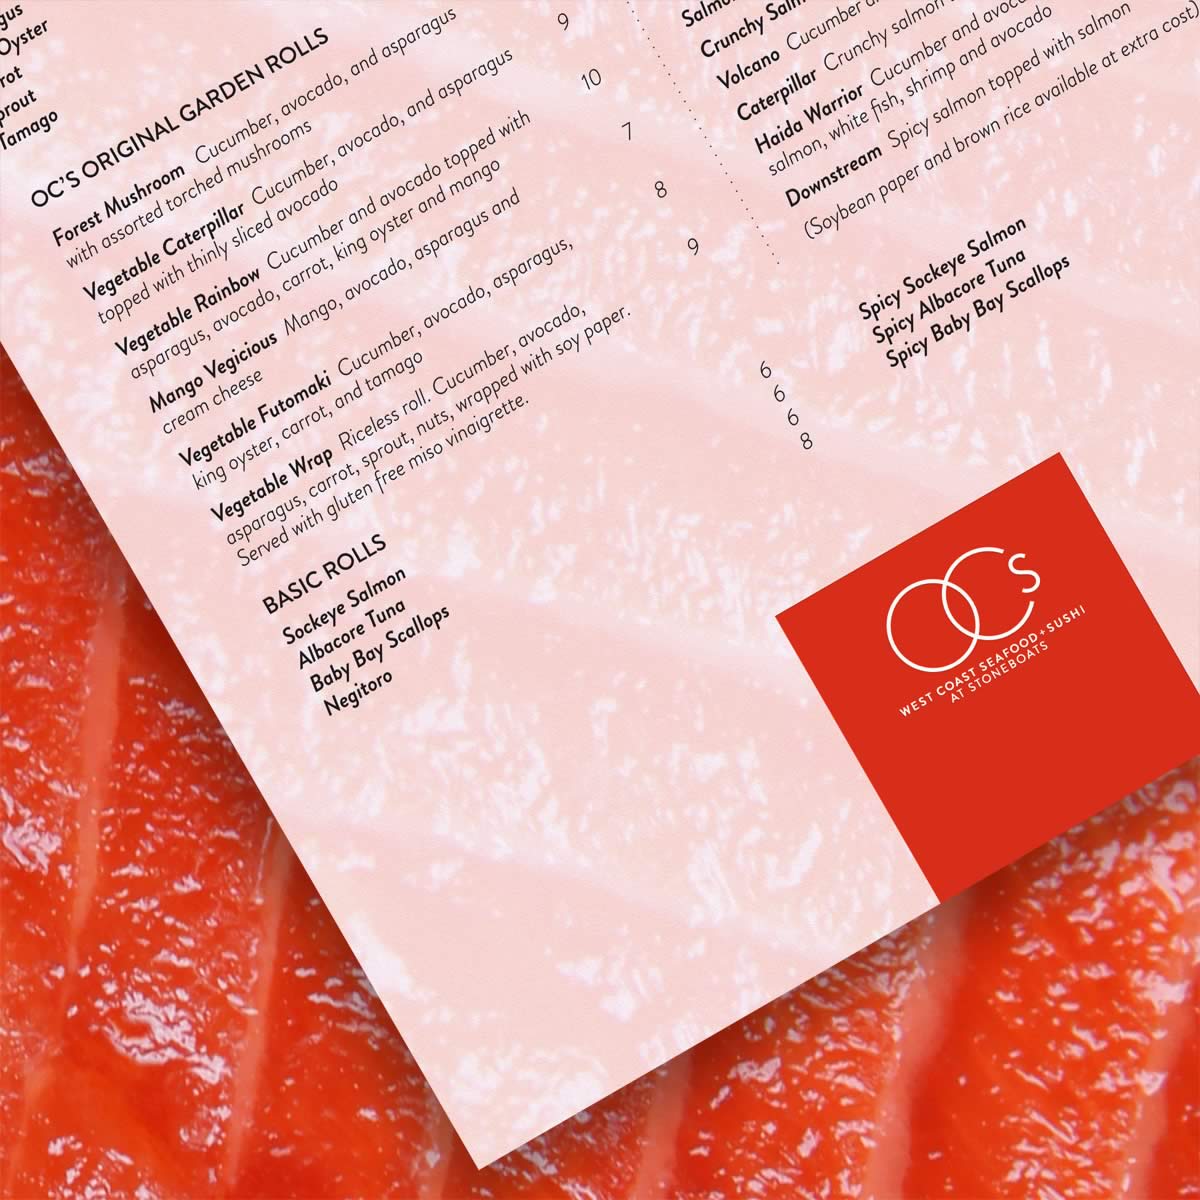 Photograph of the OC’s West Coast menu (first iteration)